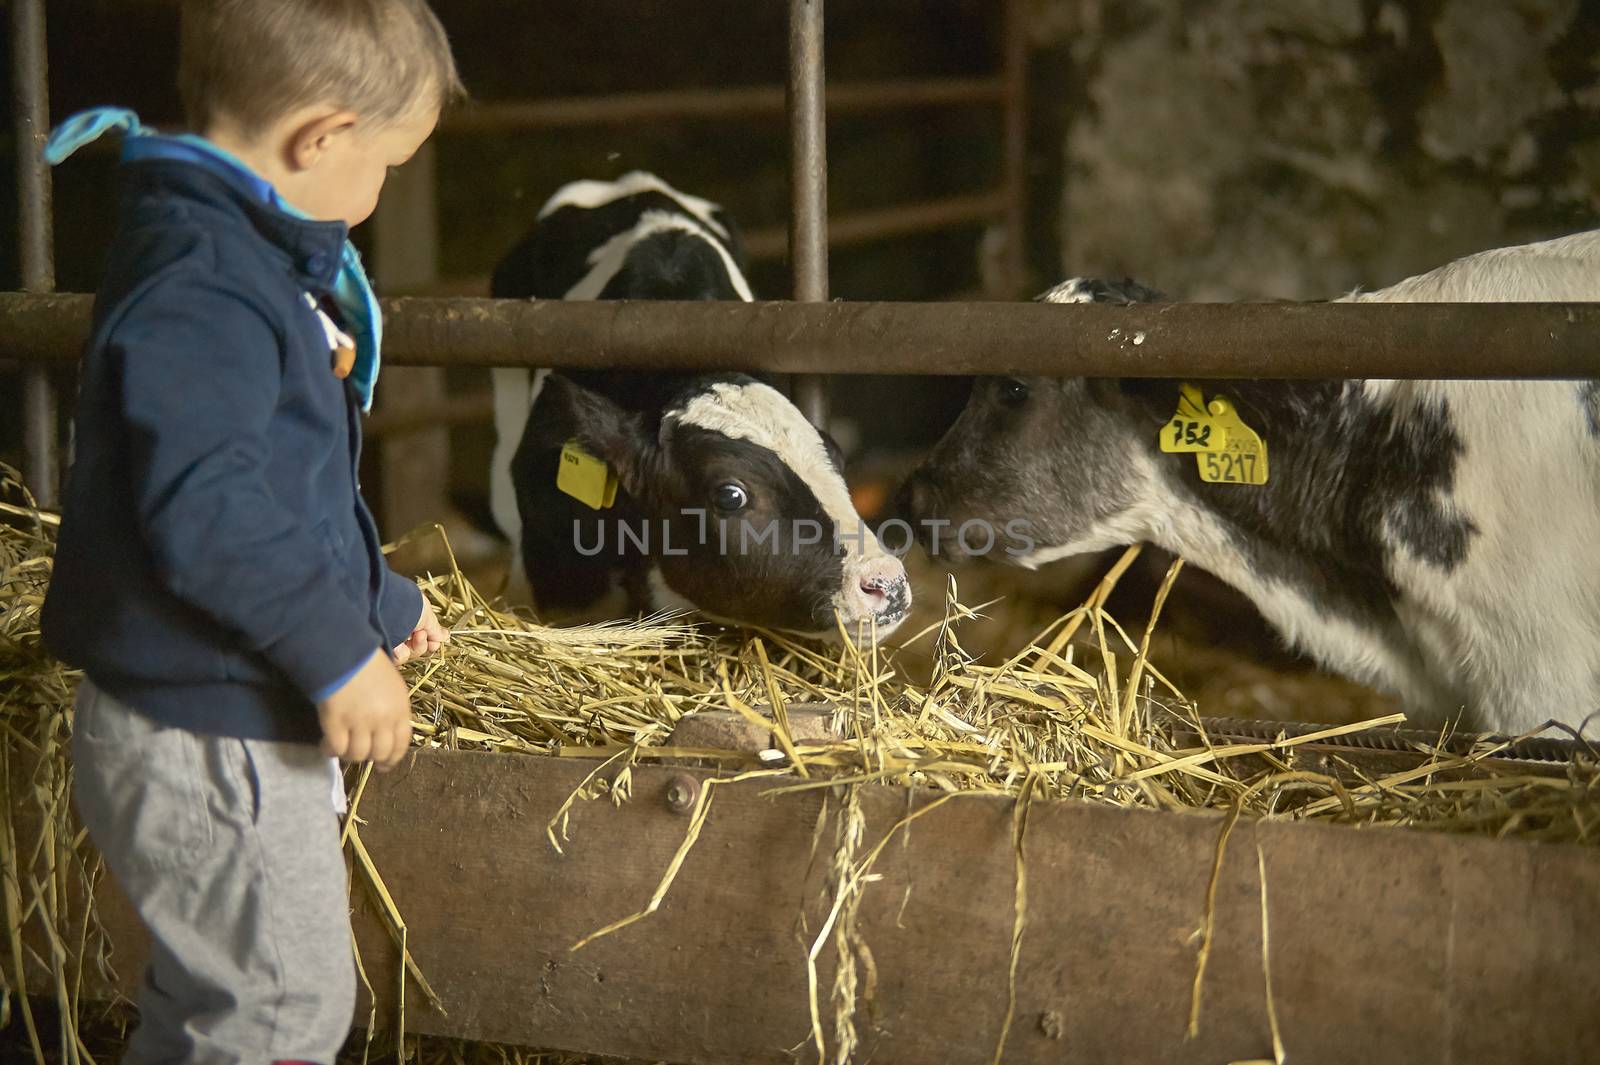 ROVIGO, ITALY 19 FEBRUARY 2020: Children play in a stable with farm cows